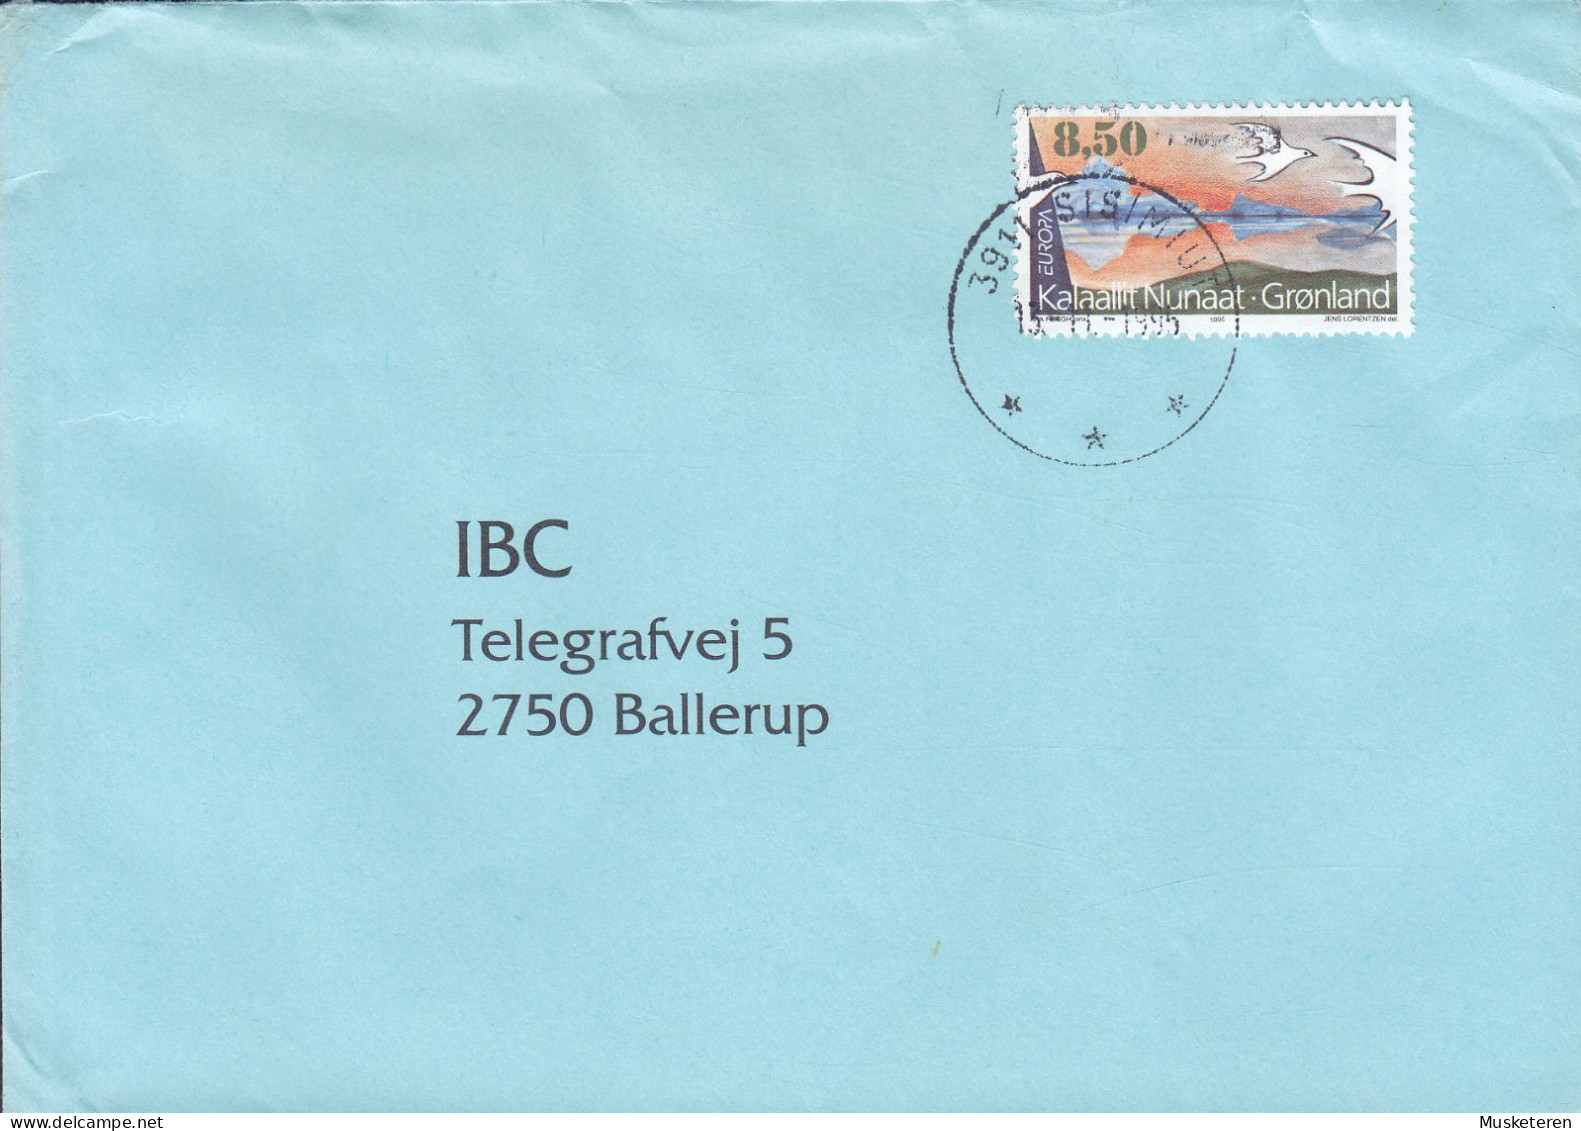 Greenland SISIMIUT 1995 Cover Brief Lettre BALLERUP Denmark 8.50 Kr. Europa CEPT Stamp - Covers & Documents